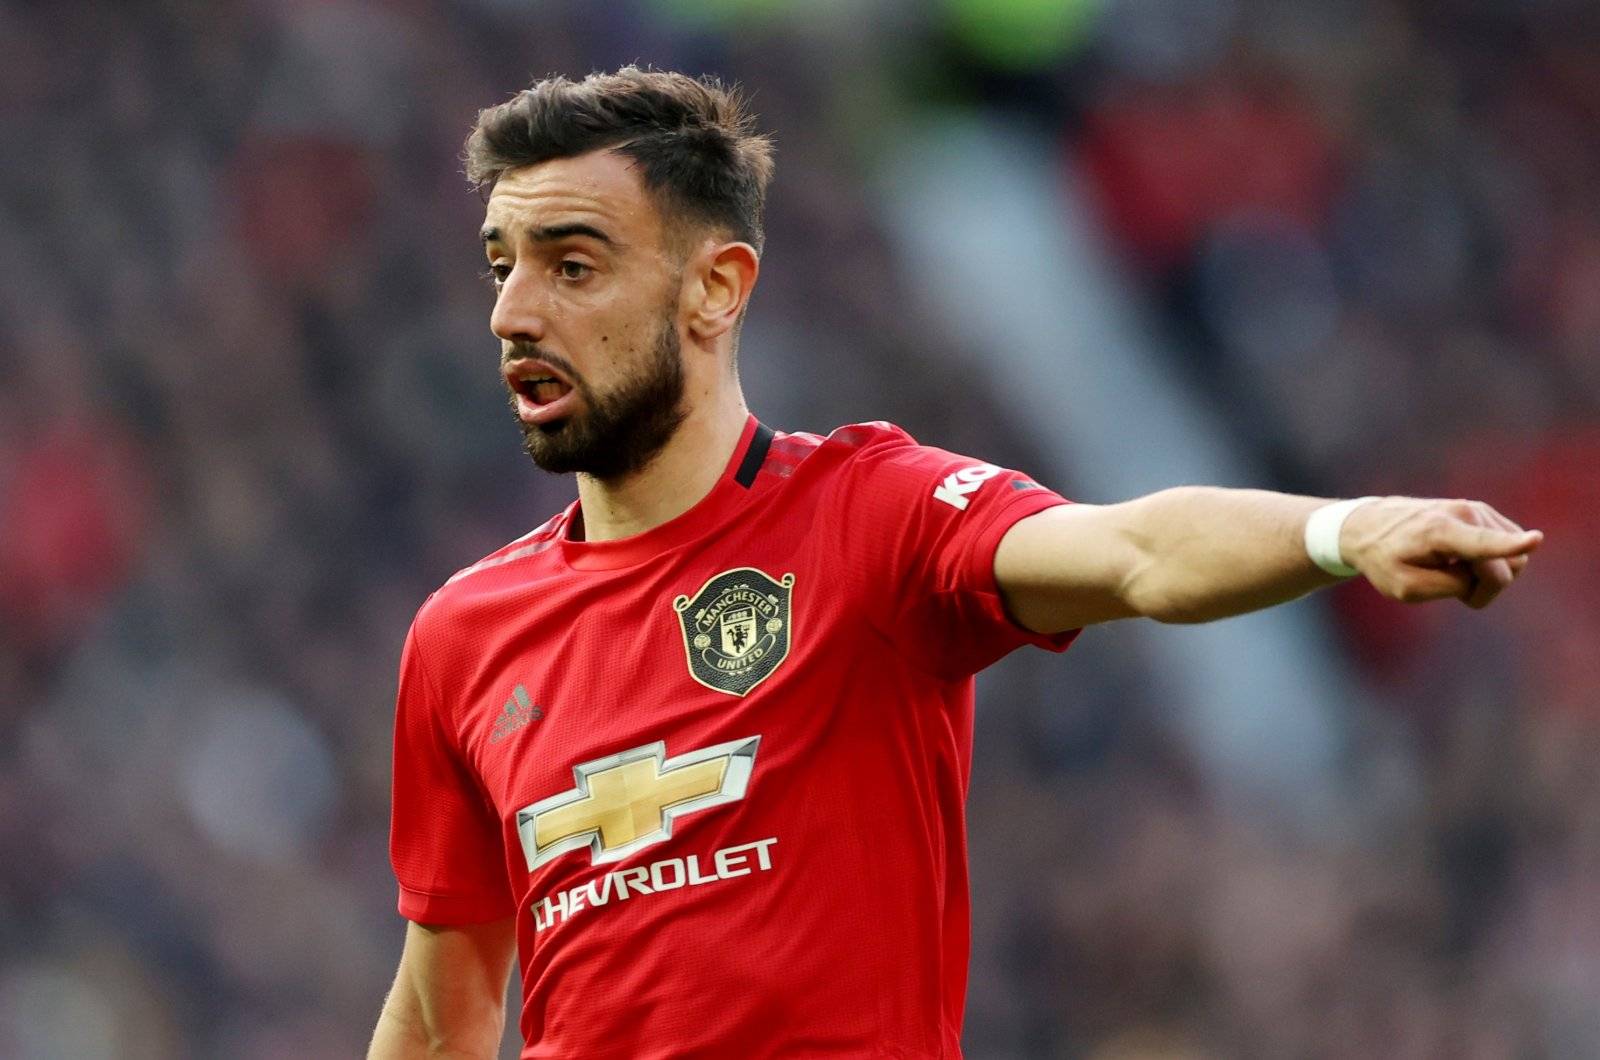 Manchester United: Fans drool over Bruno Fernandes as he wins Premier League Player of the Month award - Manchester United